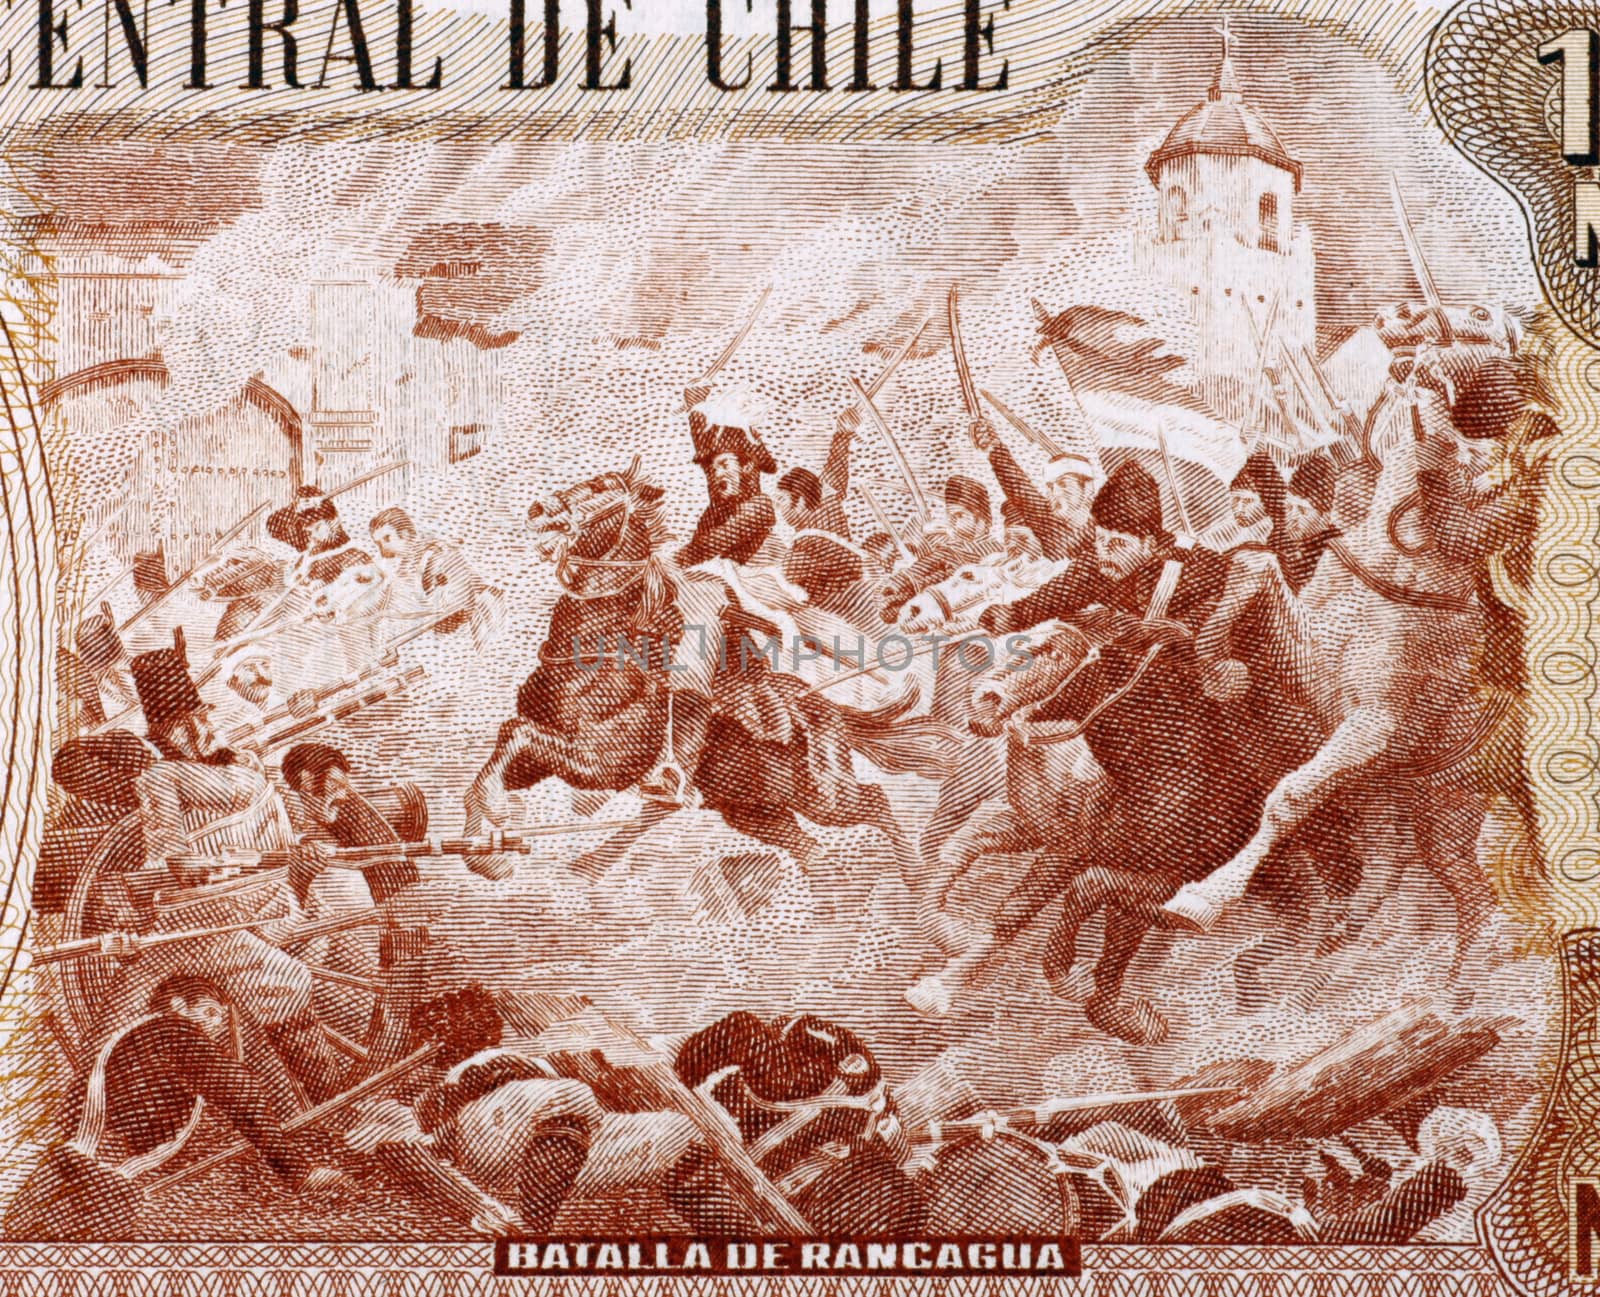 Battle of Rancagua on 10000 Escudos 1970 from Chile. 